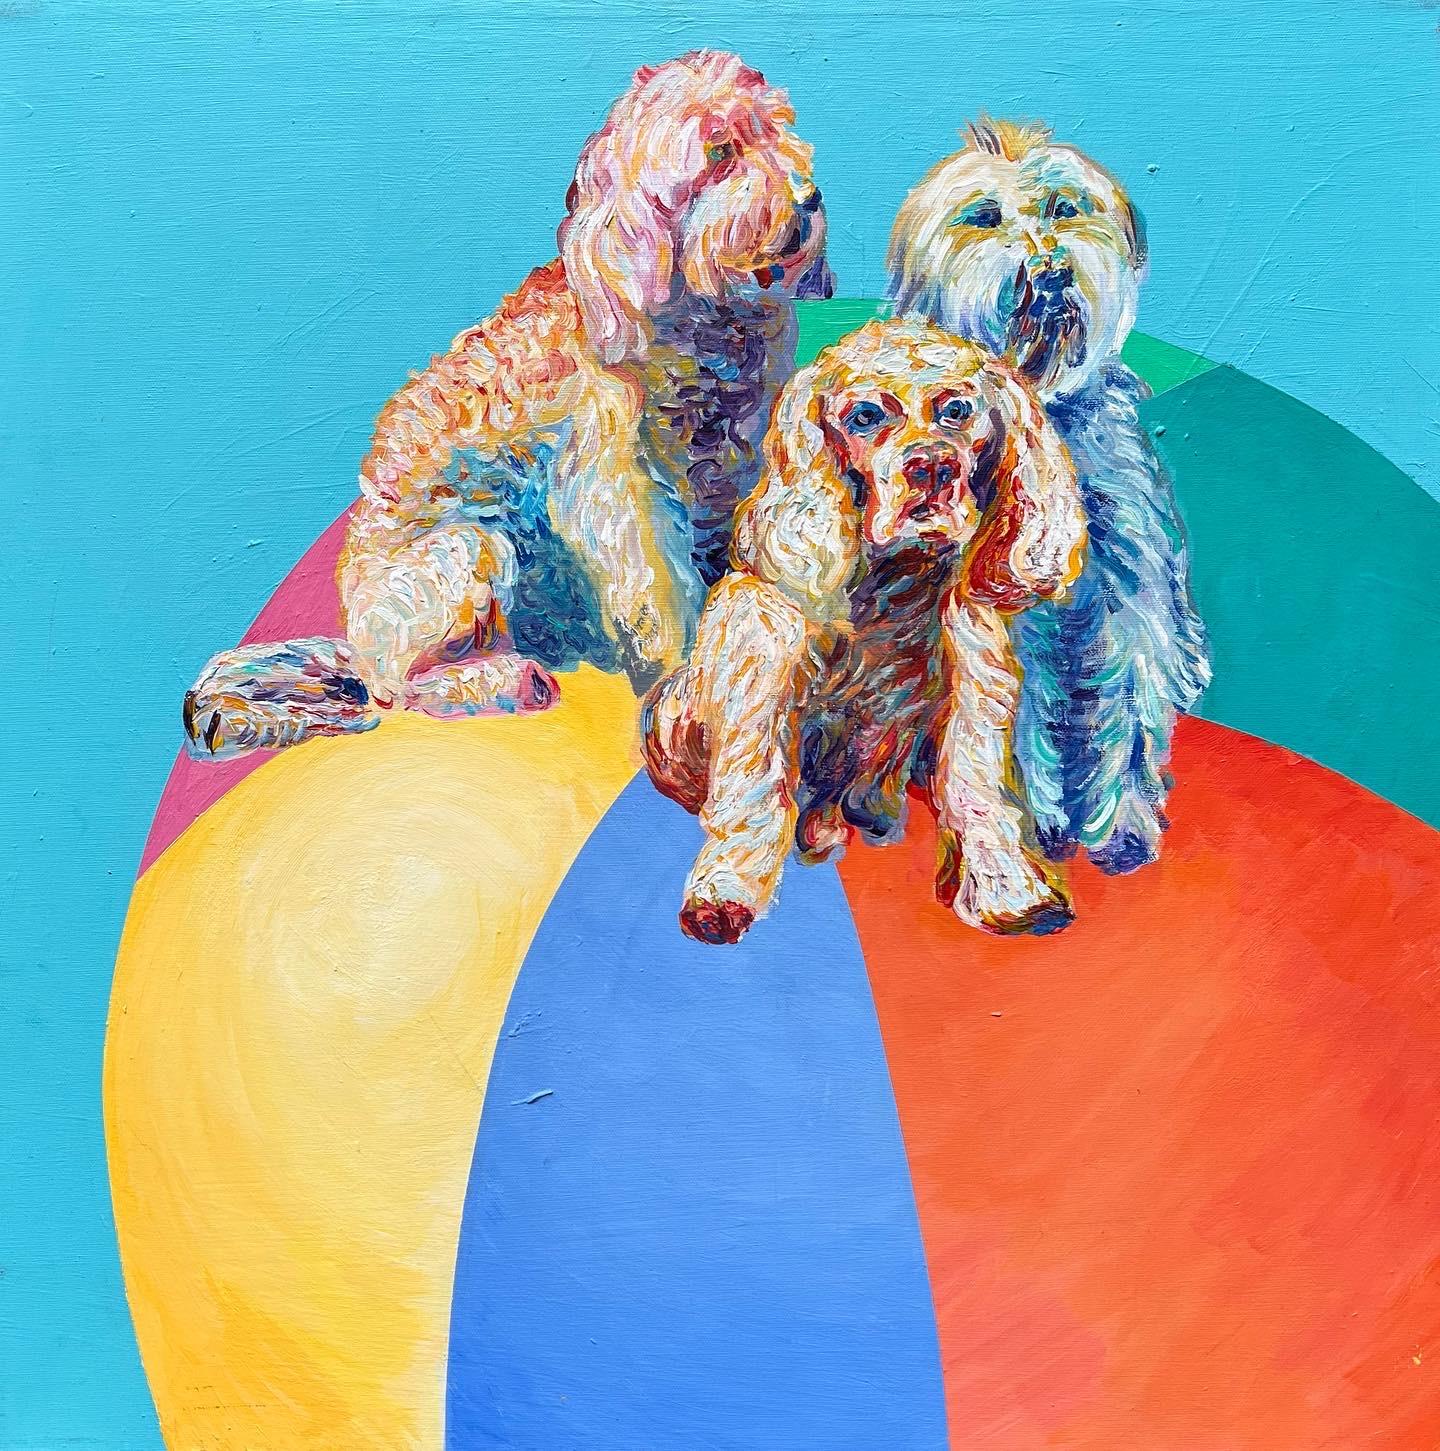 Renelio Marin Animal Painting - Globetrotter: Contemporary Acrylic Painting of Dogs and Beachball